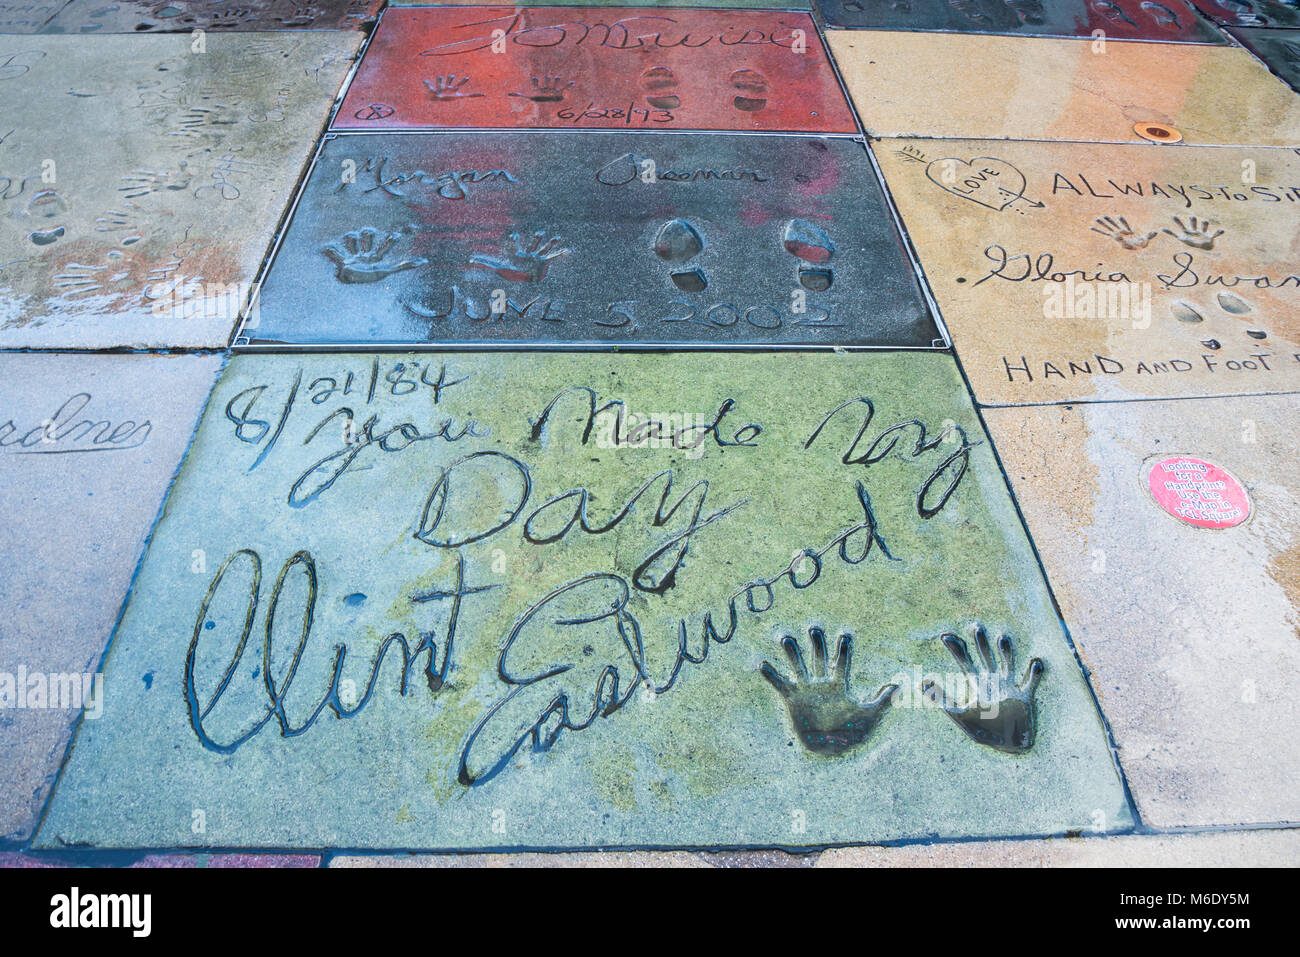 Signatures and Hand Prints of Celebrities, Hollywood Walk of Fame, L.A., California Stock Photo